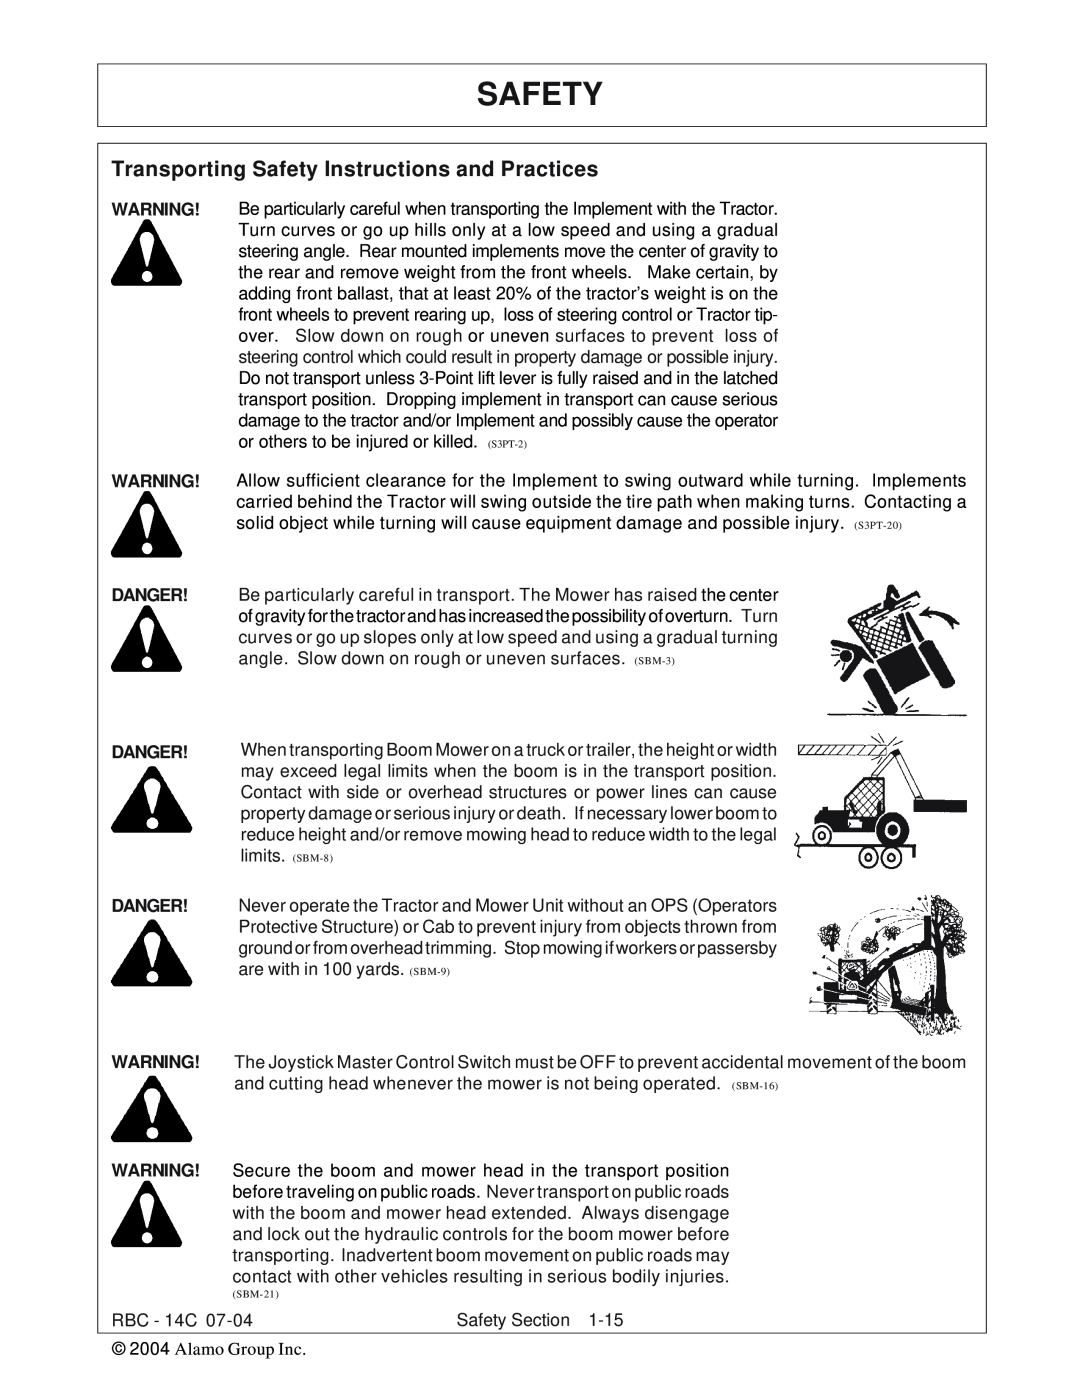 Tiger RBF-14C manual Transporting Safety Instructions and Practices, Danger 